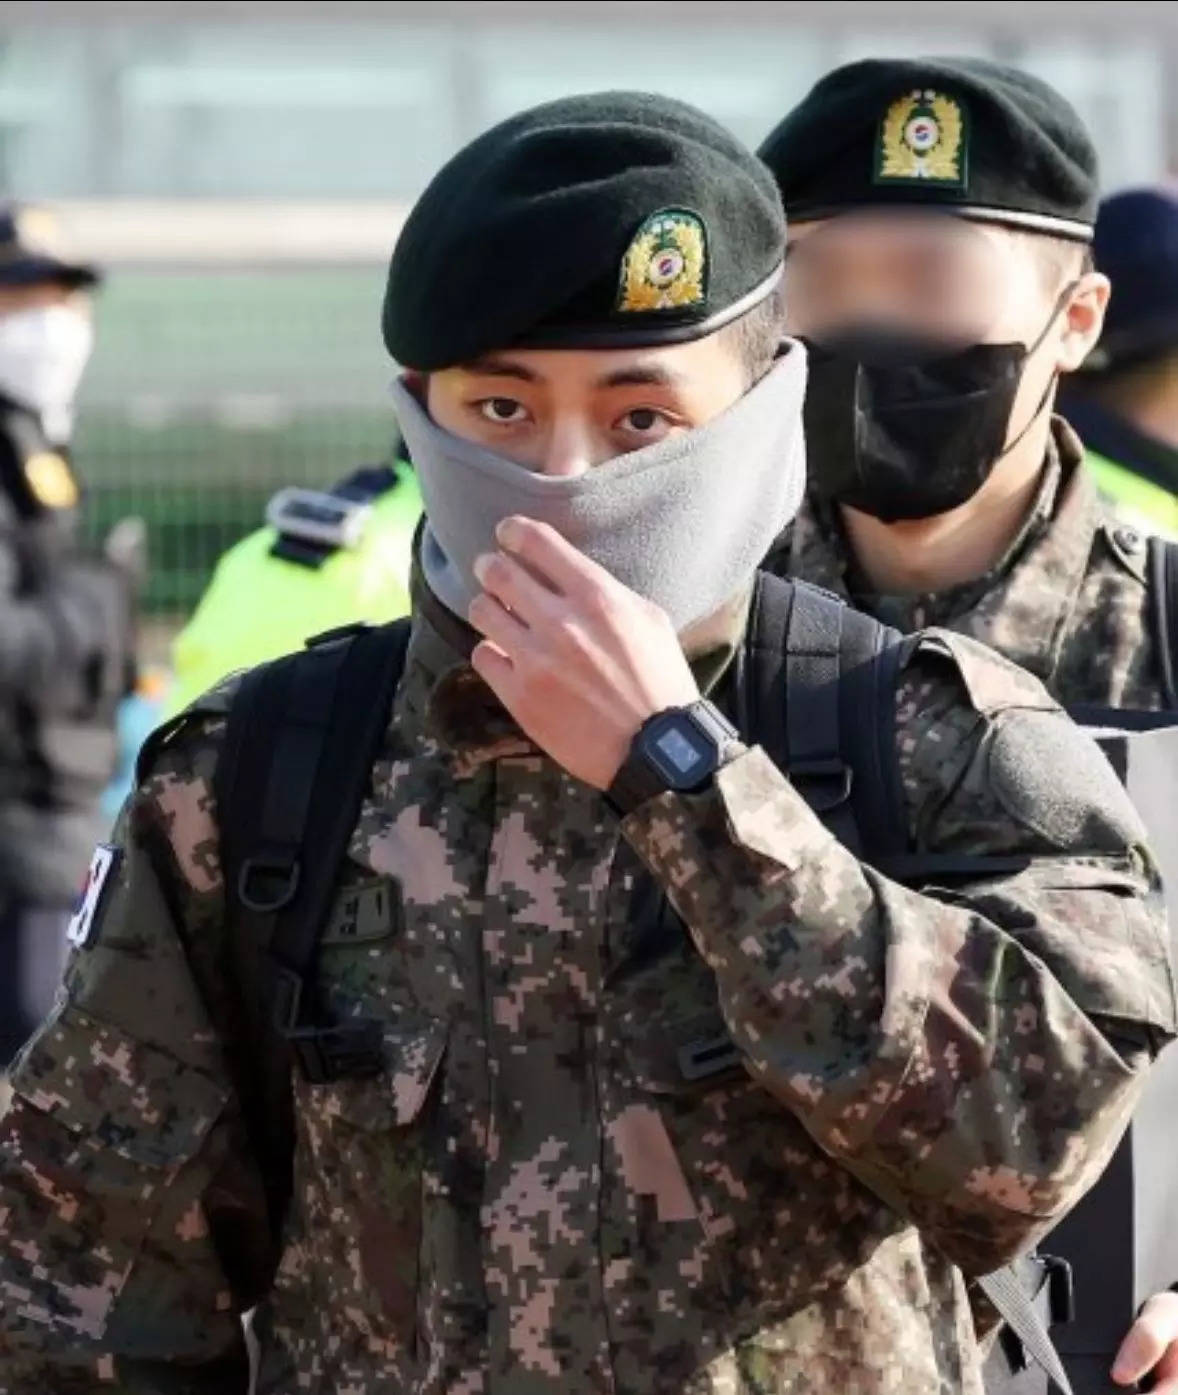 BTS39 V Looks Handsome As Ever In His Military Uniform